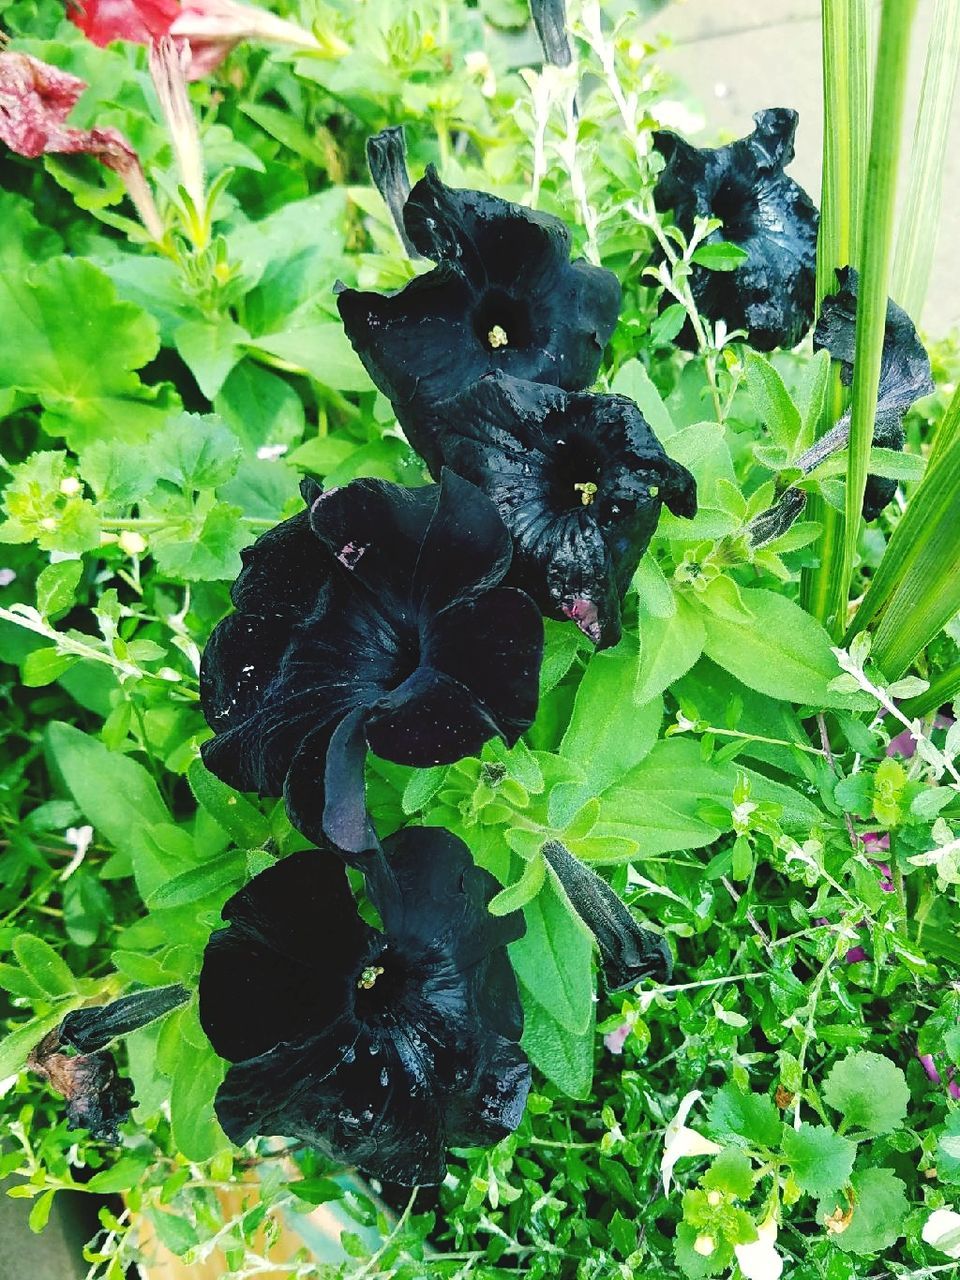 CLOSE-UP OF BLACK BUTTERFLY ON PLANTS